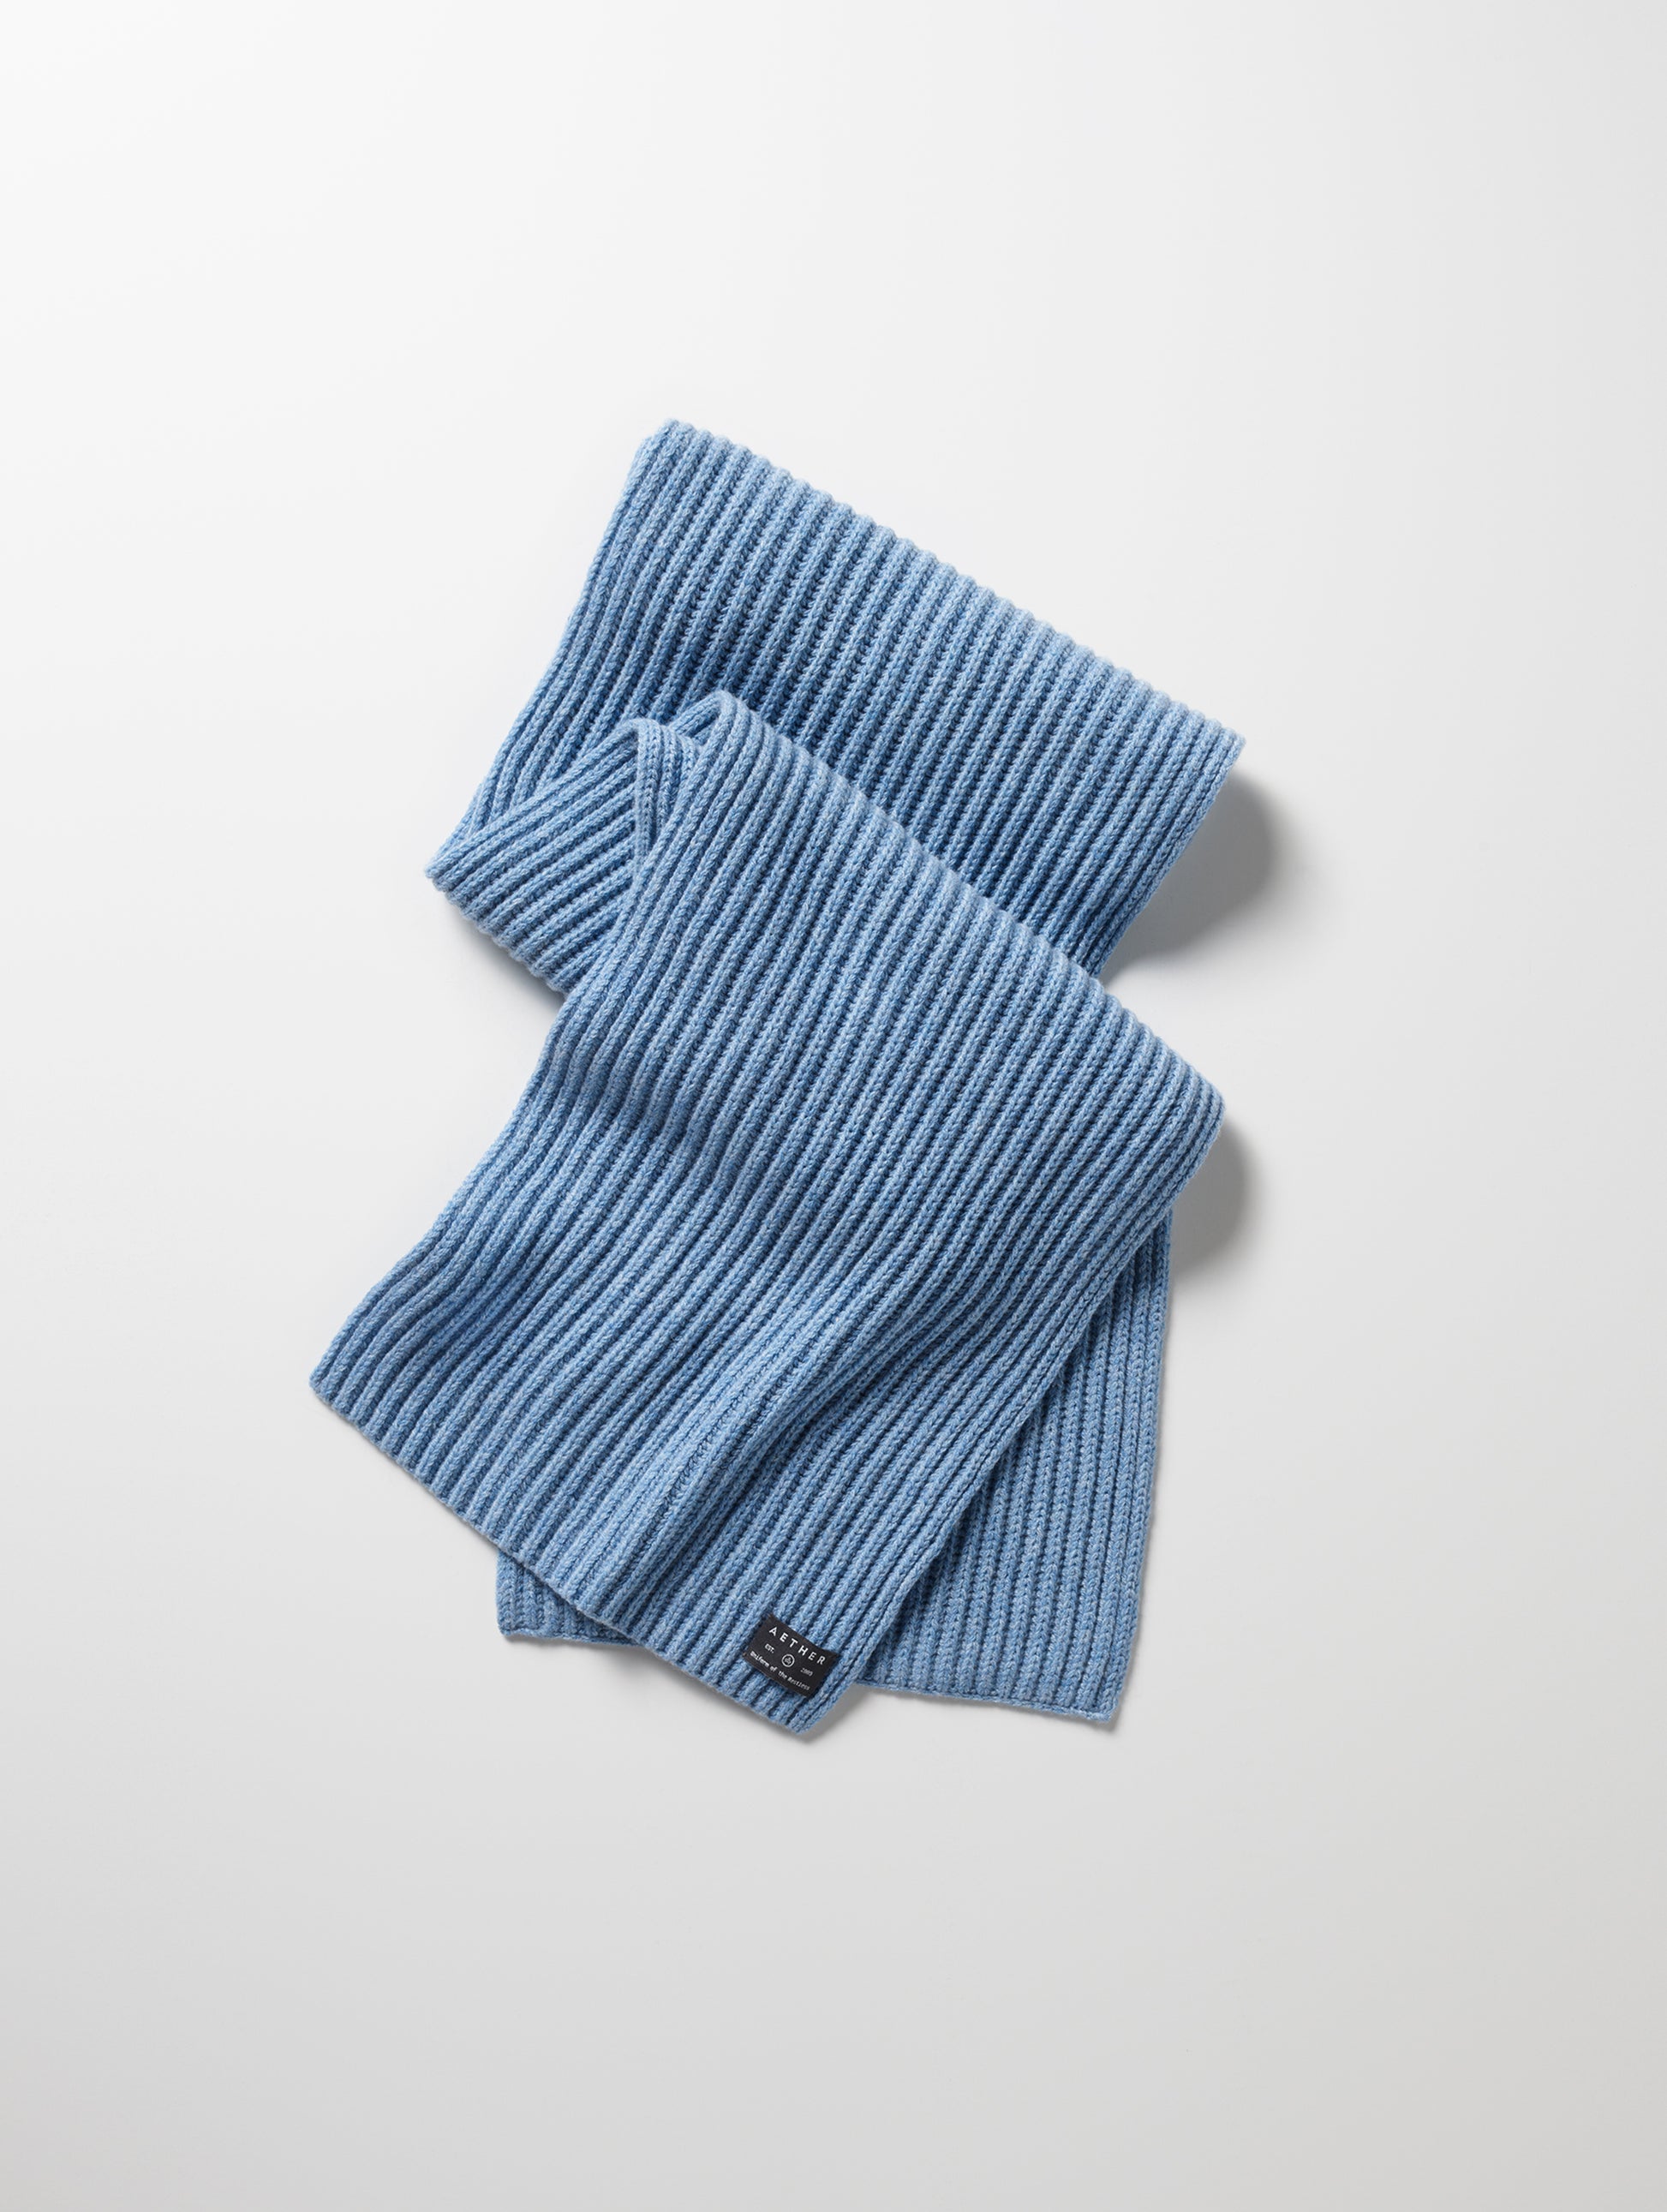 light blue cashmere scarf from AETHER Apparel